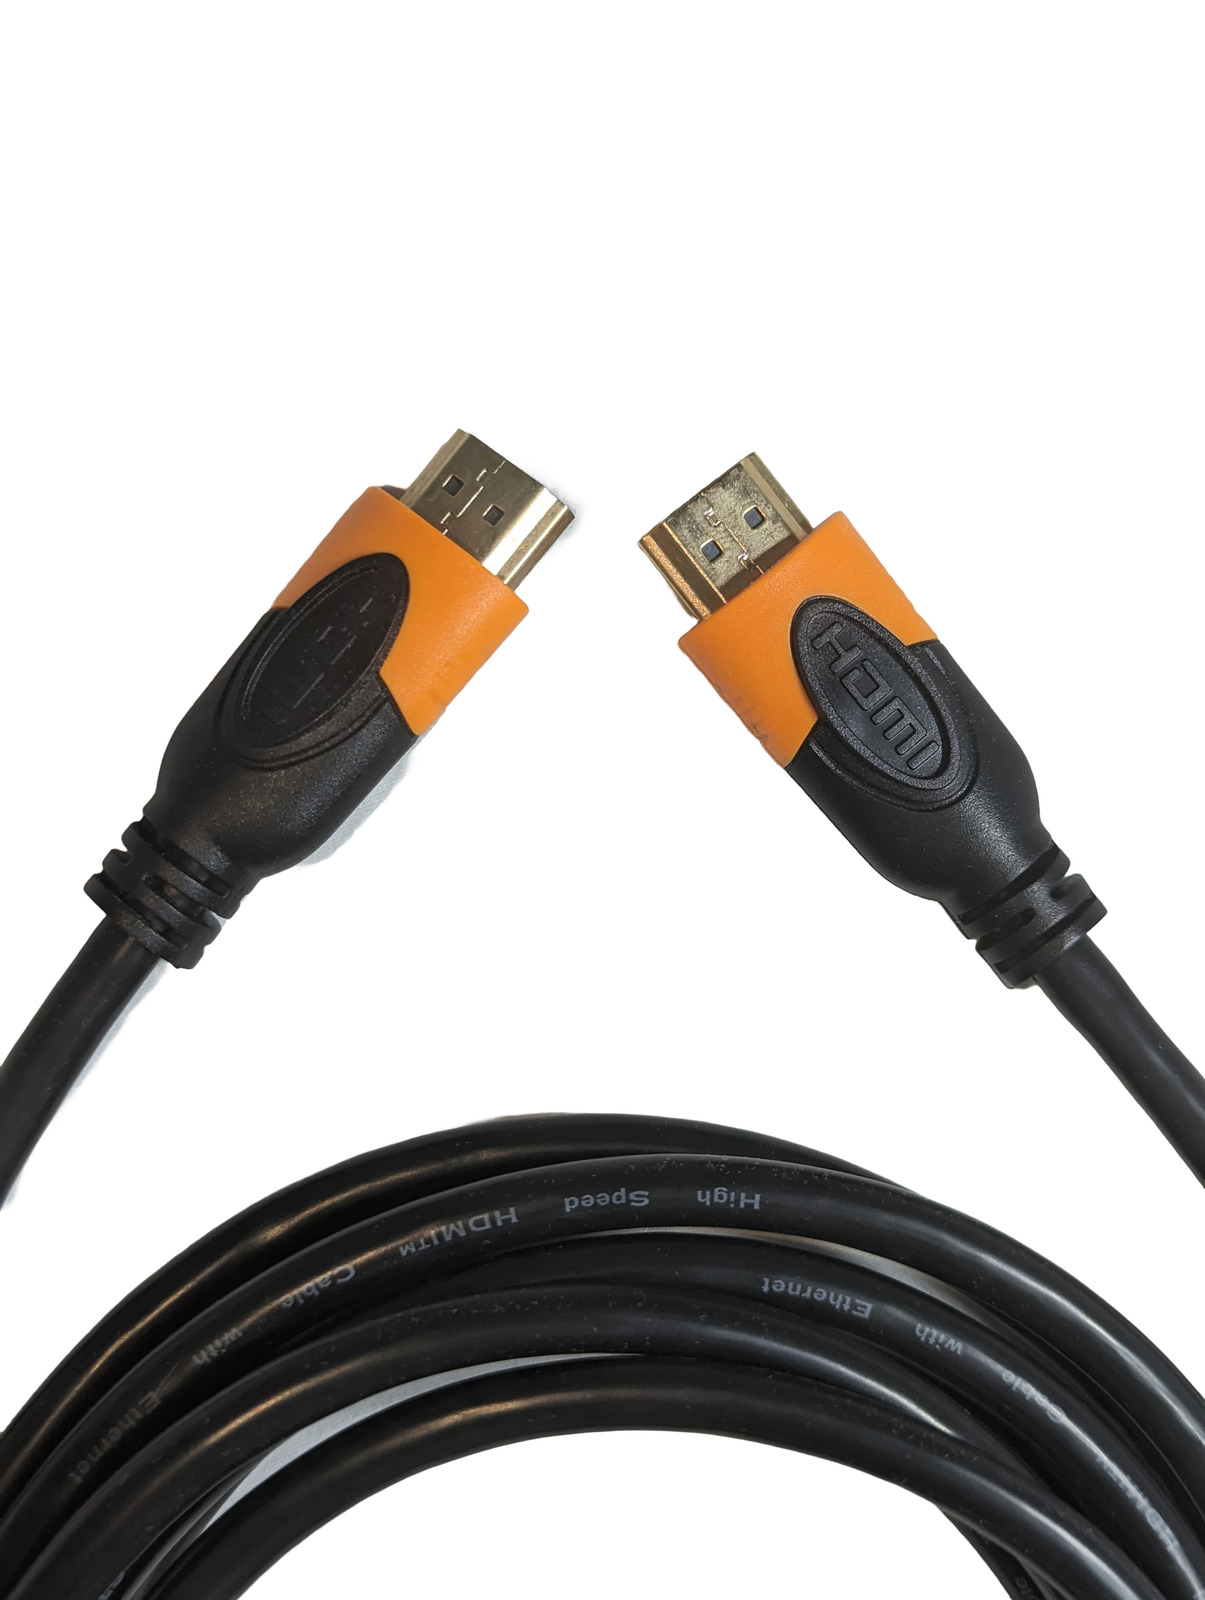 K2 Professional Series HDMI Cable 3M 10ft (9.8) Solid Copper Wire Gold Connector